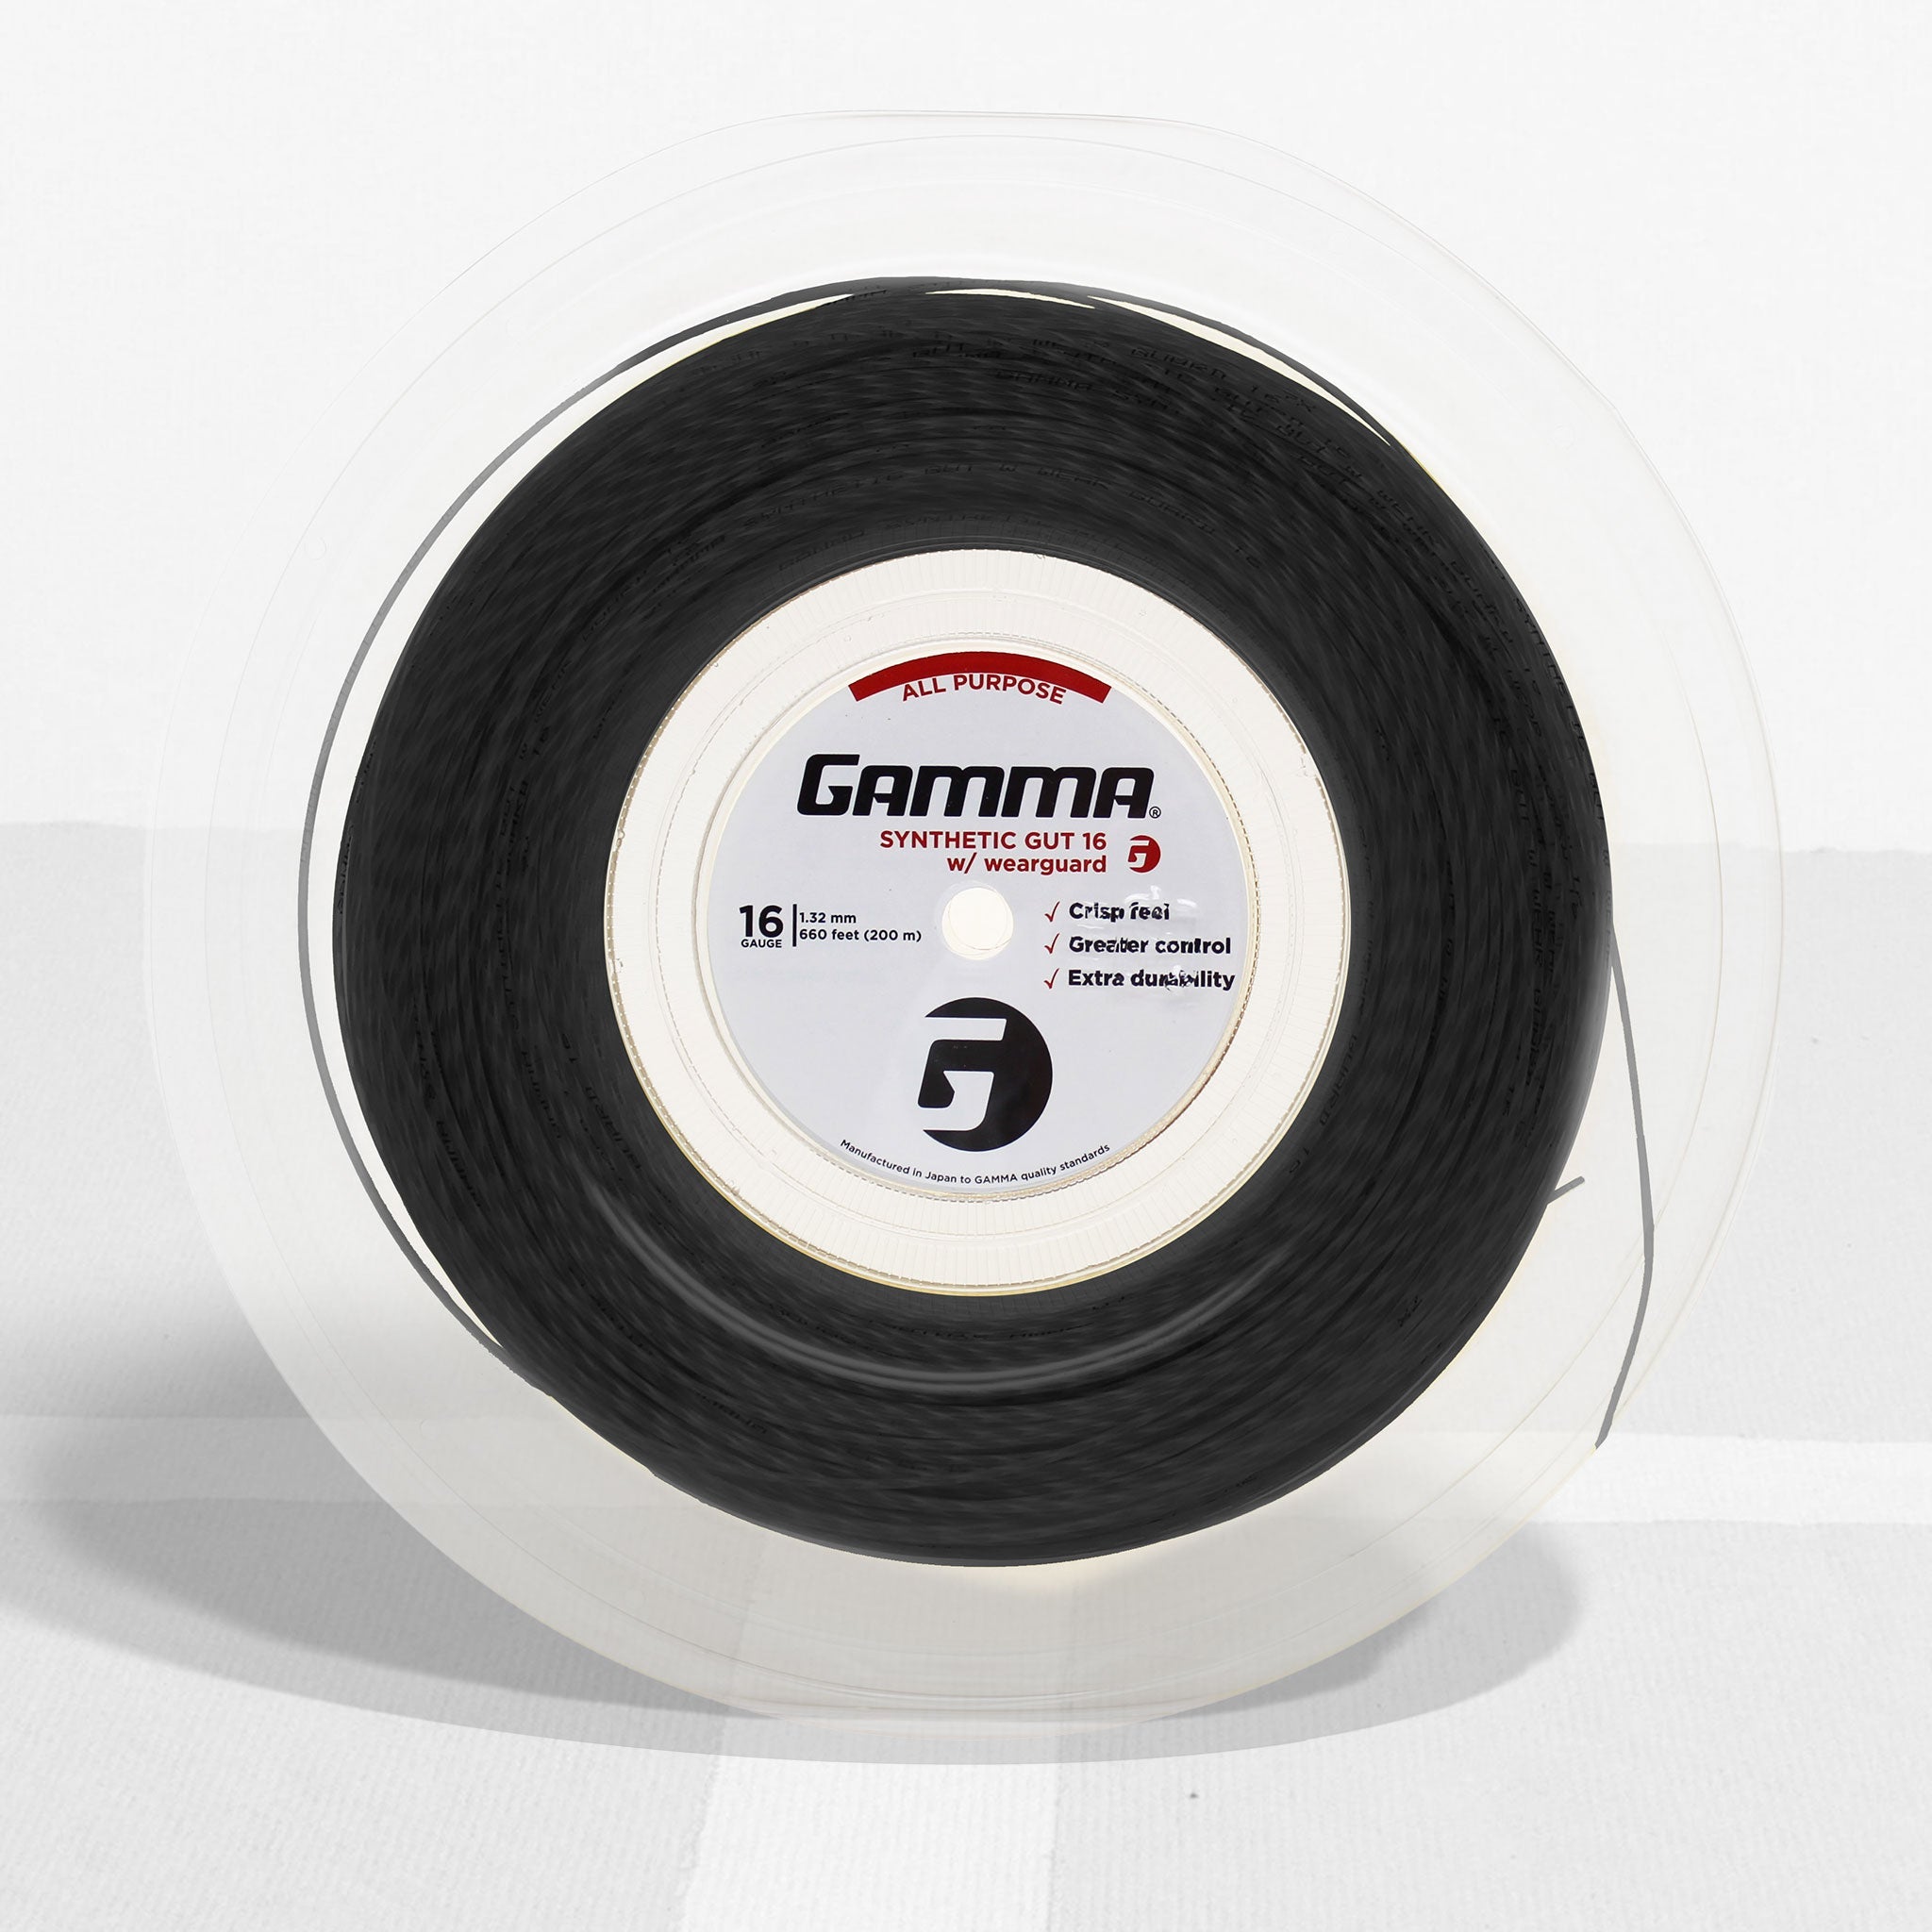 16g Gold - Gamma Sports Synthetic Gut Tennis String Reel 220m - 虹